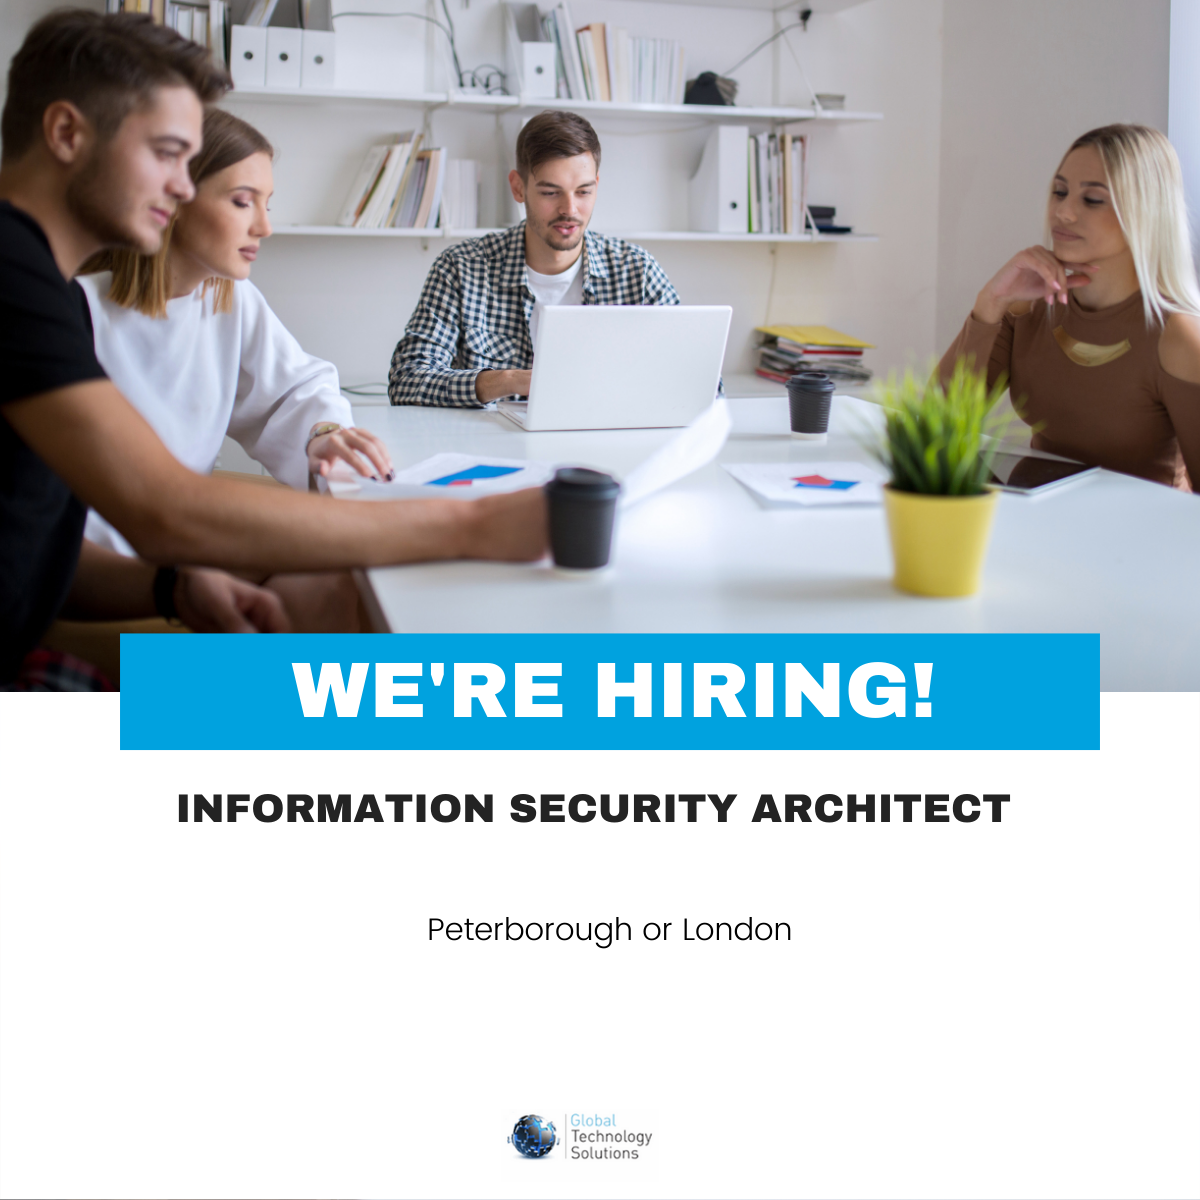 Security Architect jobs in Peterborough